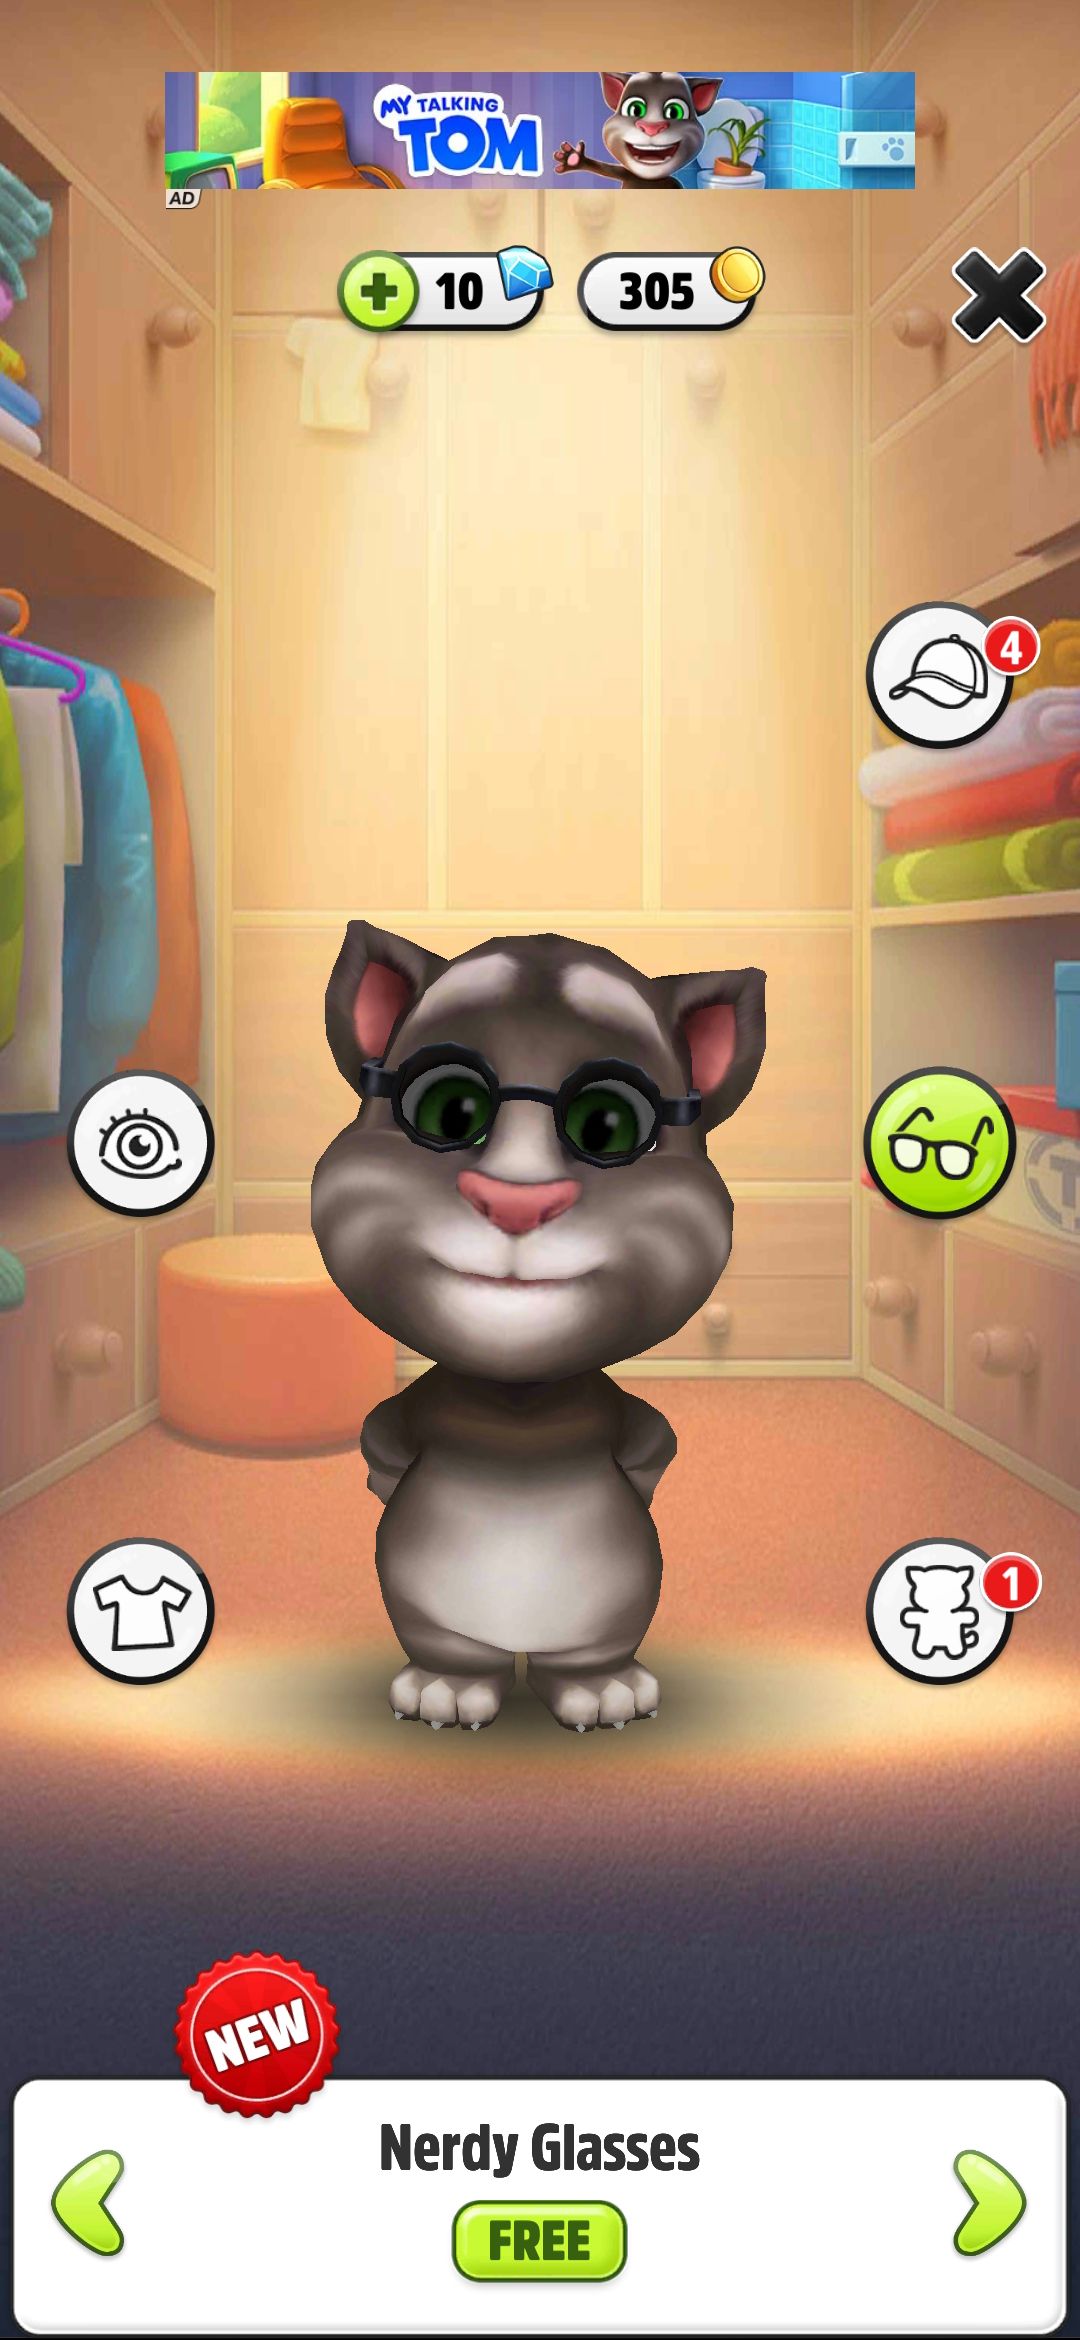 My Talking Tom App Outfit Screen